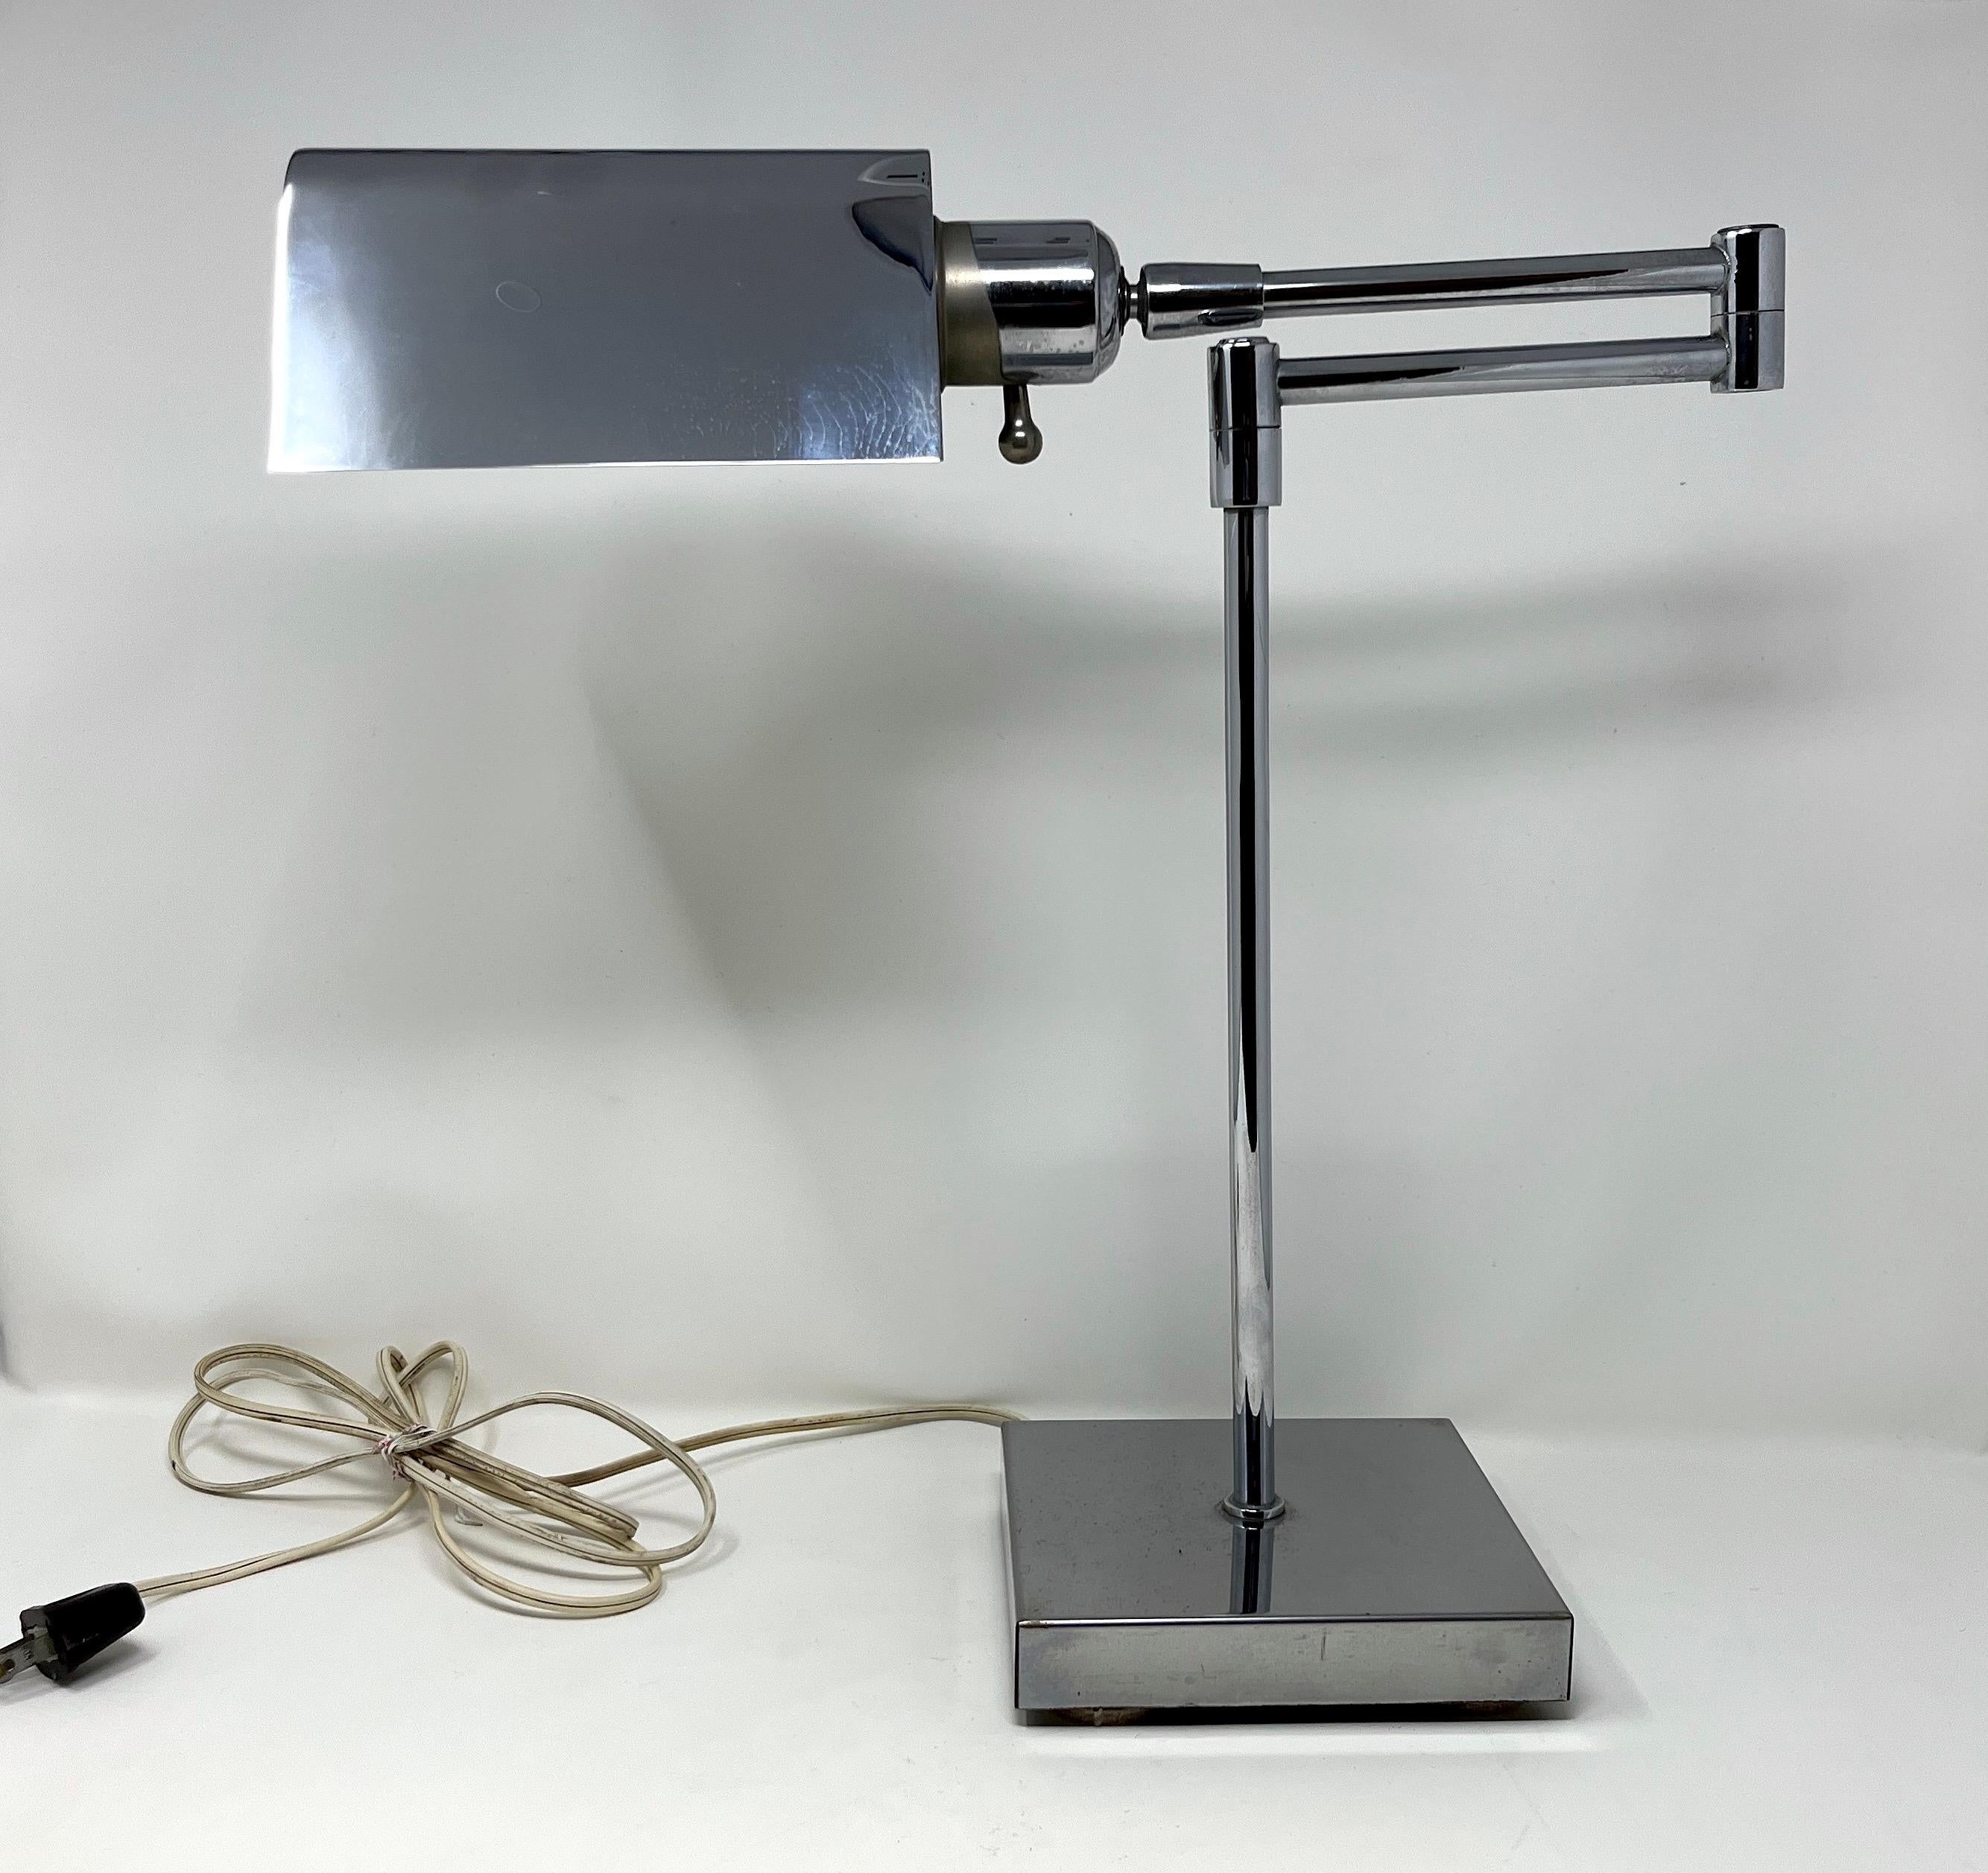 An elegant midcentury desk lamp in polished chrome in the style of Koch & Lowy; the tent shade articulates on a ball and socket and further adjusts on a swing-arm.

Lovely true vintage piece. No markings except the patent in the swivel joint which